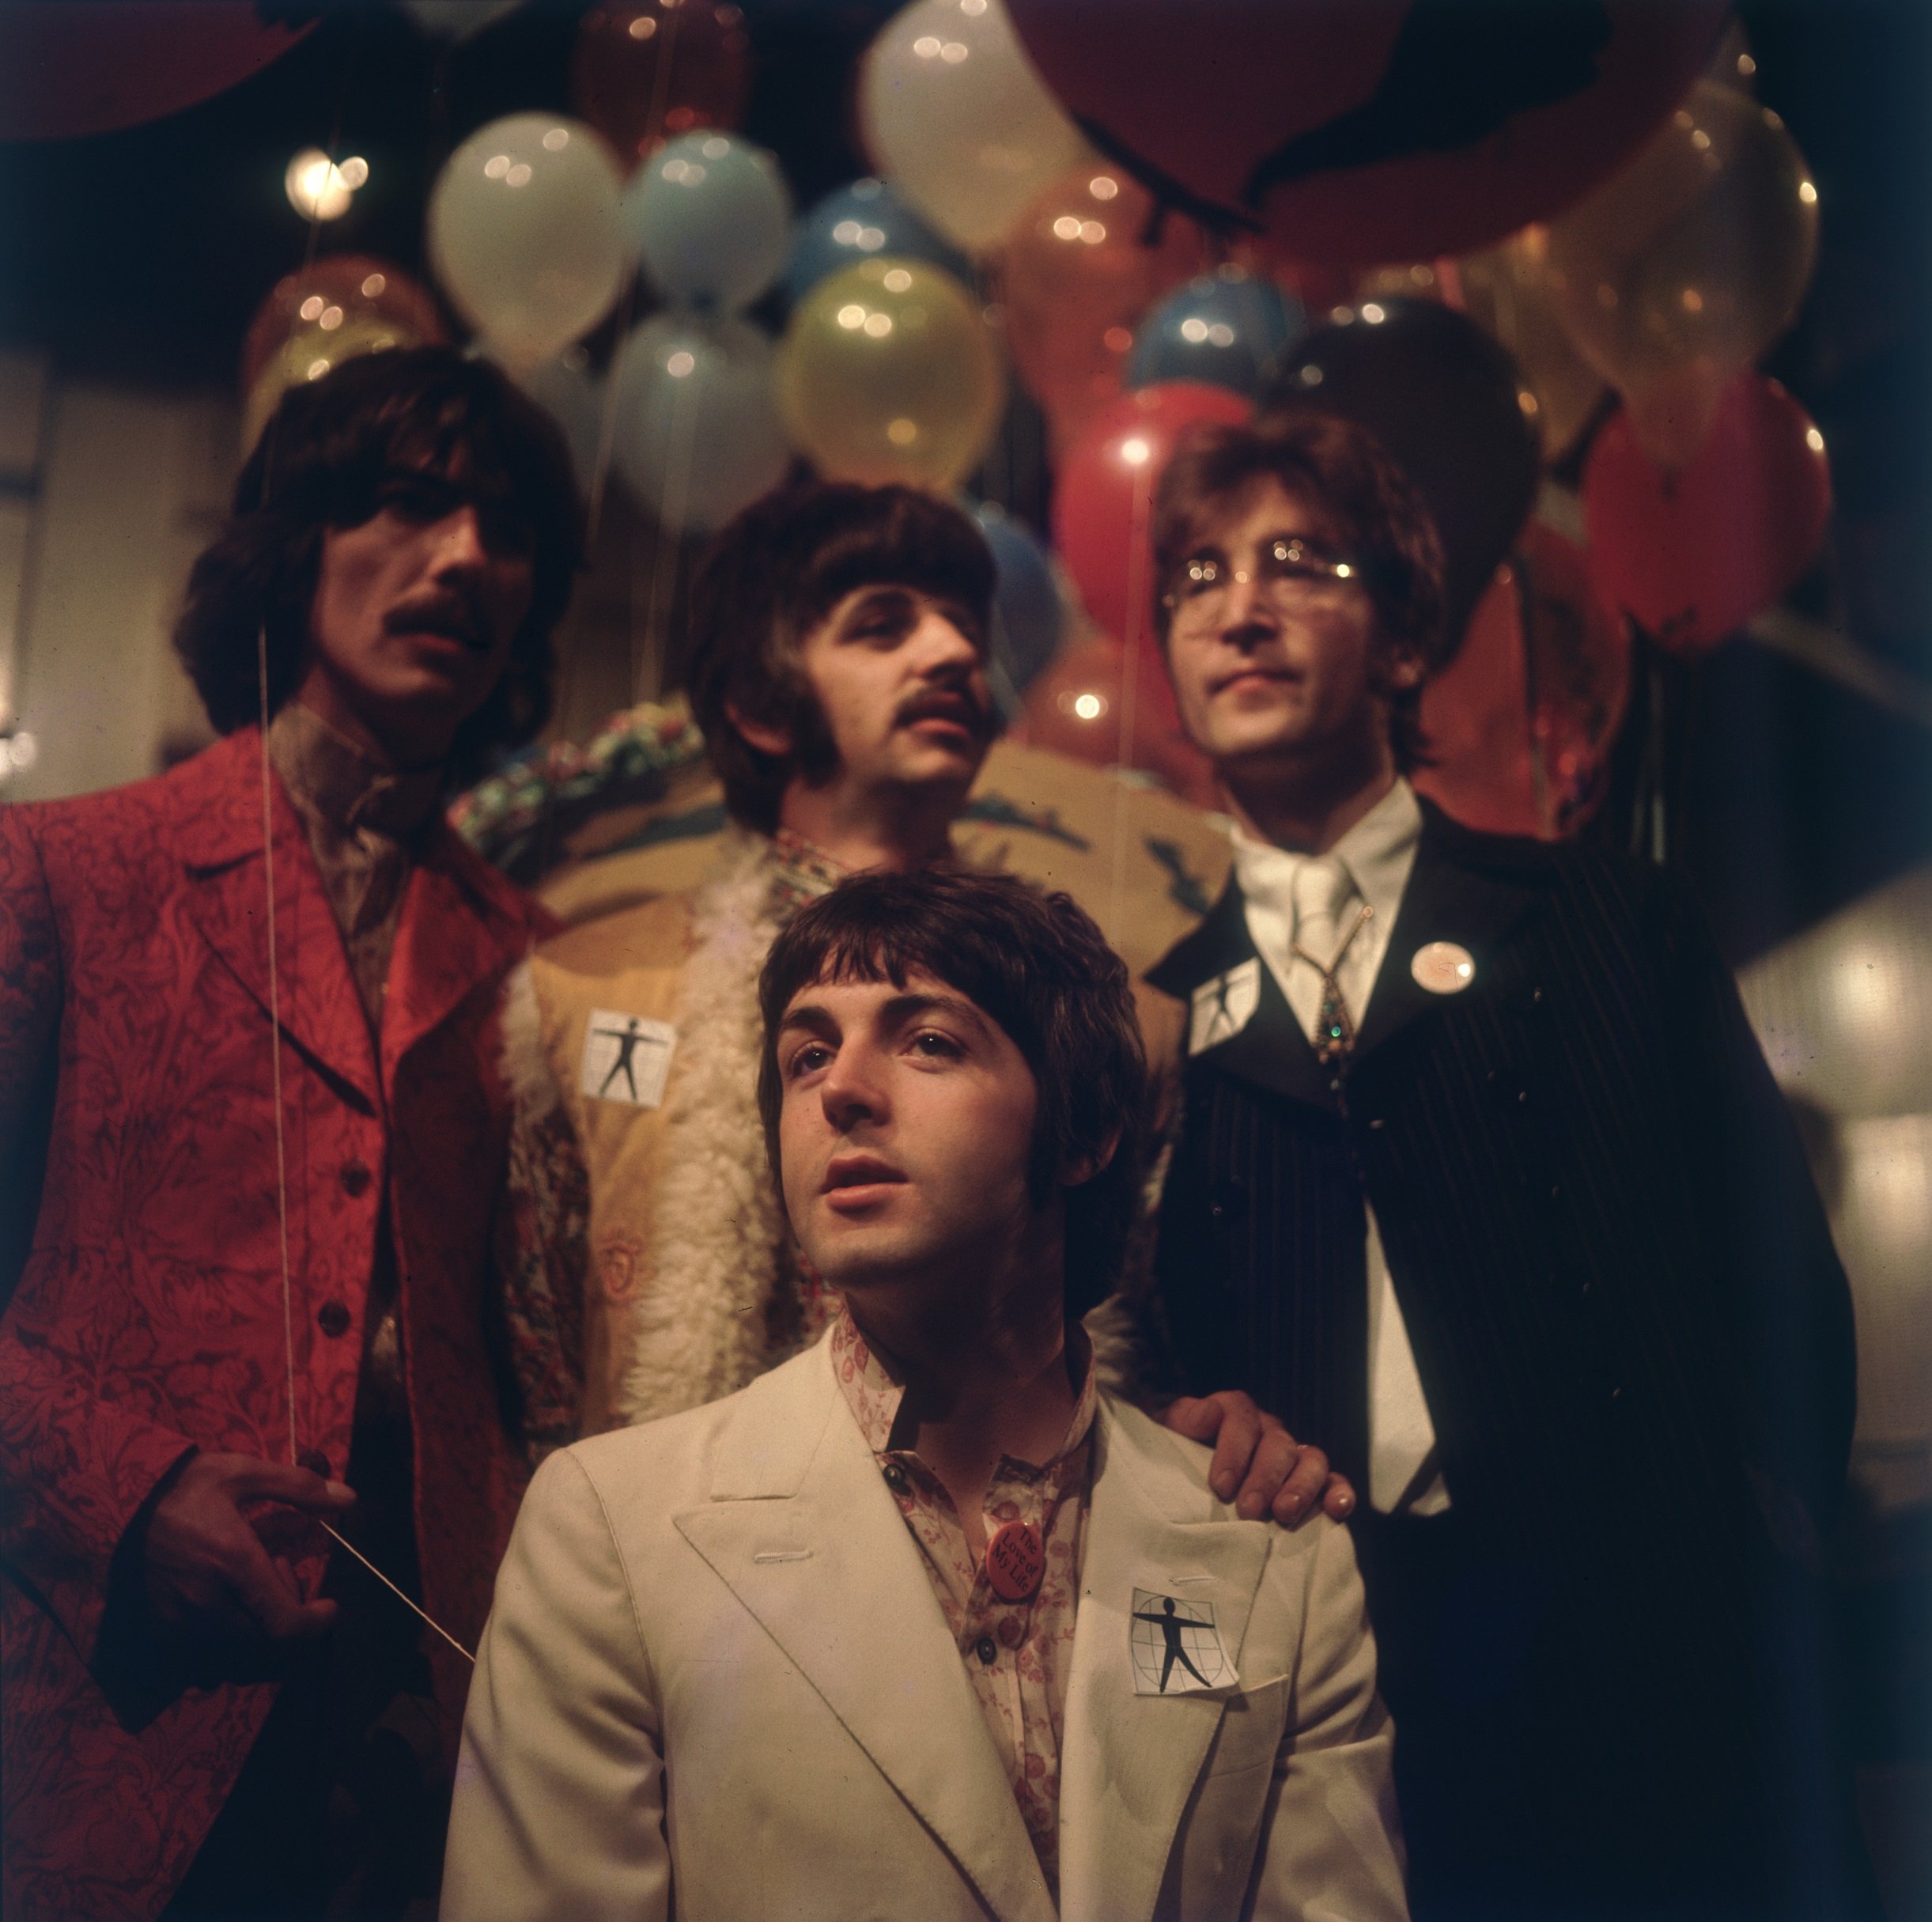 The Beatles' George Harrison, Ringo Starr, Paul McCartney, and John Lennon with balloons before a performance of 'All You Need Is Love'